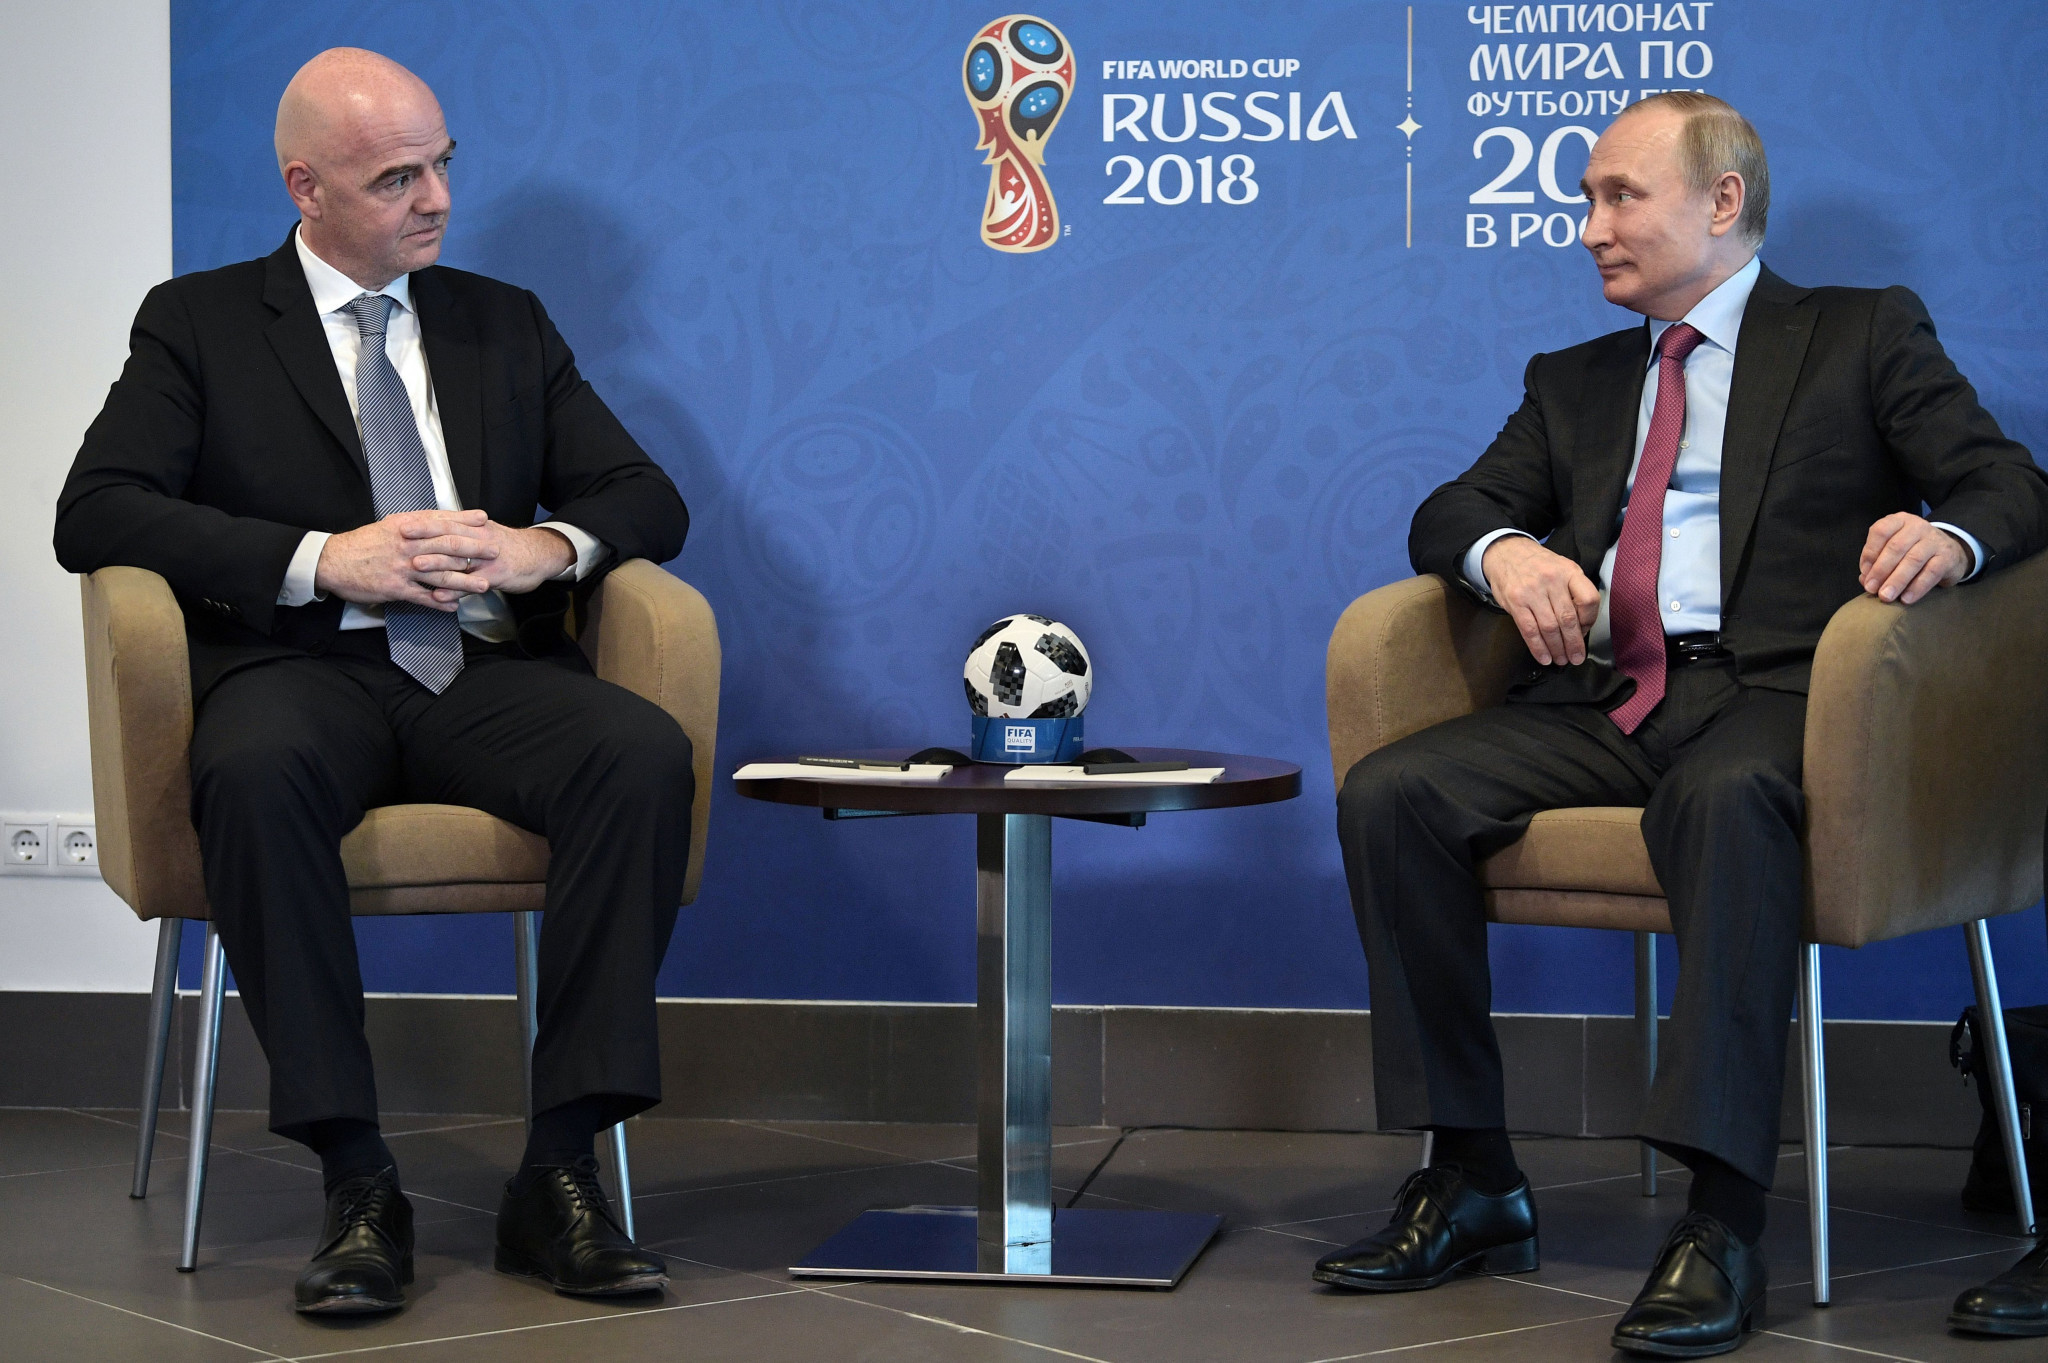 FIFA President Gianni Infantino praised Russia's preparations during a recent televised meeting ©Getty Images